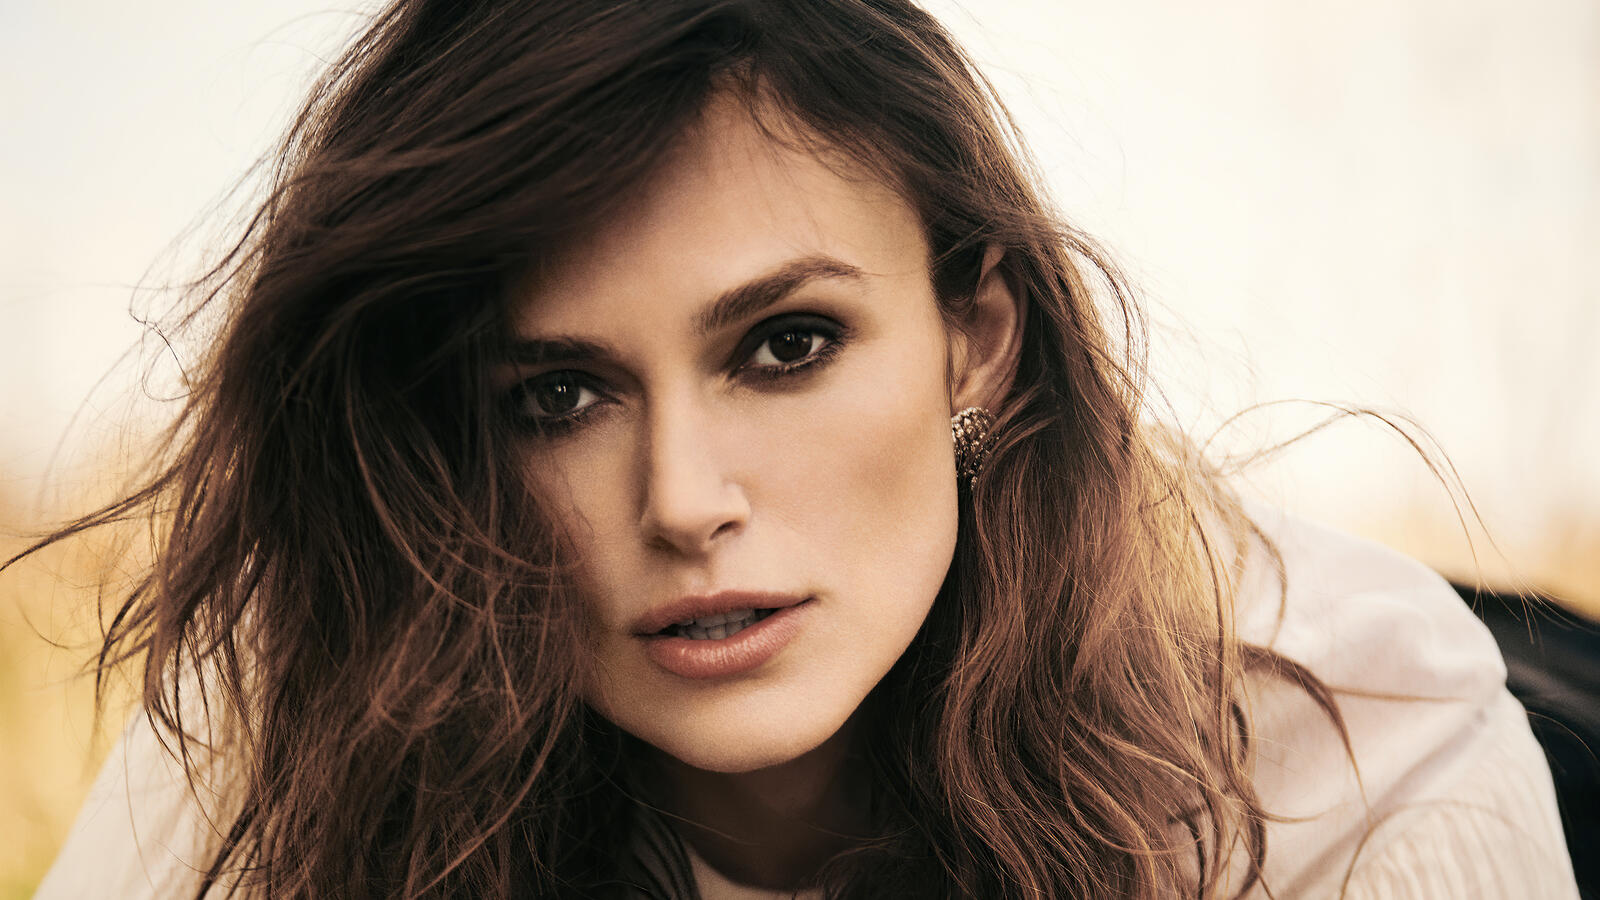 Free photo A close-up portrait of Keira Knightley